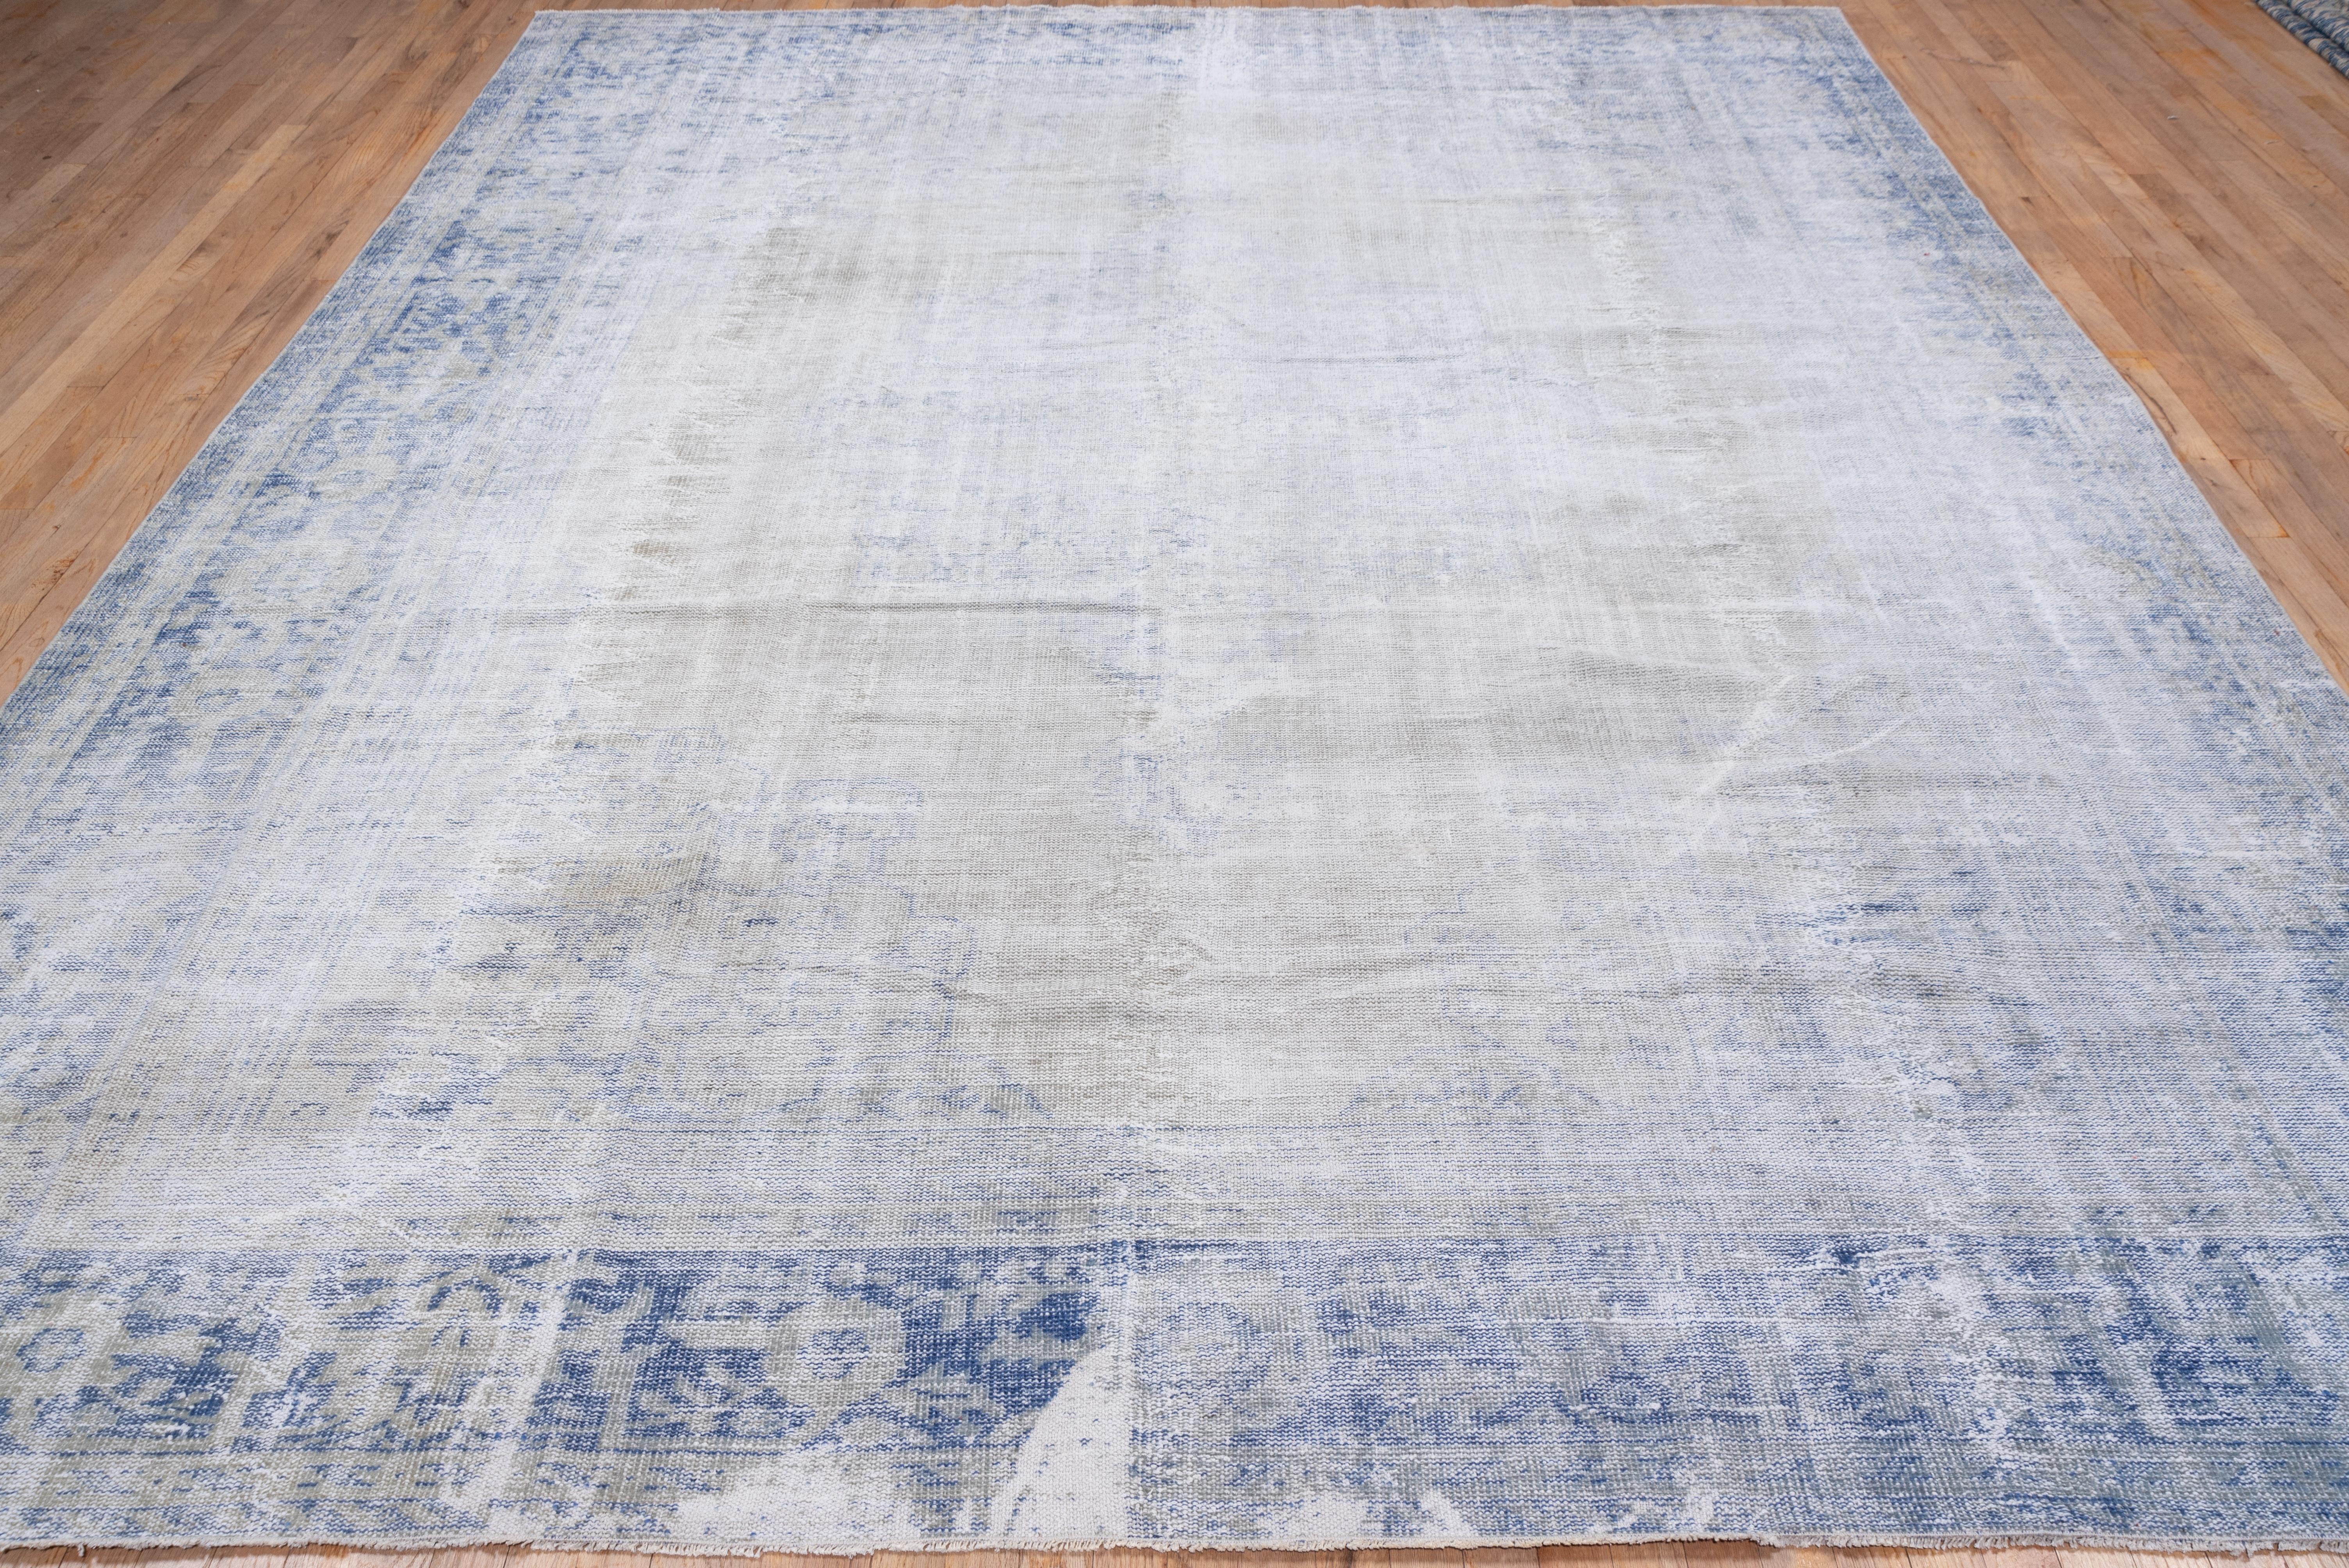 This distressed obliterated carpet allows the buyer to mentally, or otherwise, create he only trace of surviving pattern is the medium blue floriate border.